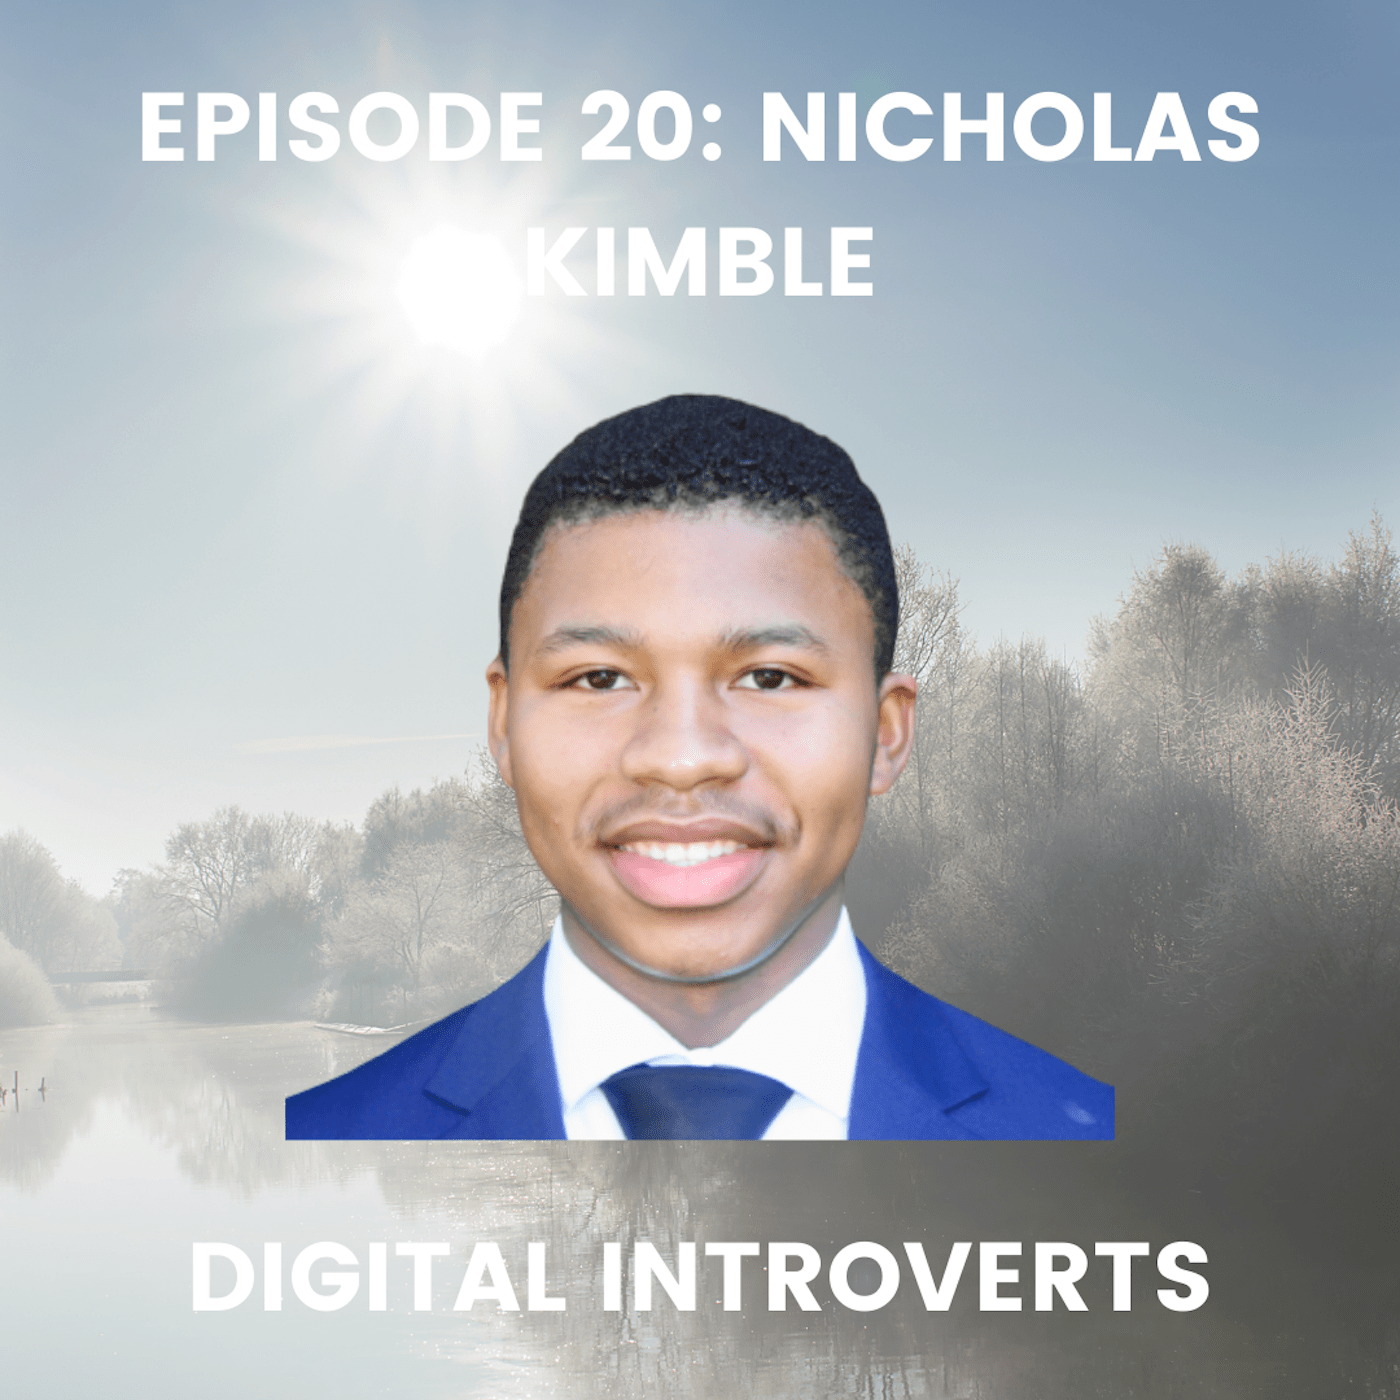 Episode 20: Becoming an Introverted Entrepreneur With Nicholas Kimble Image